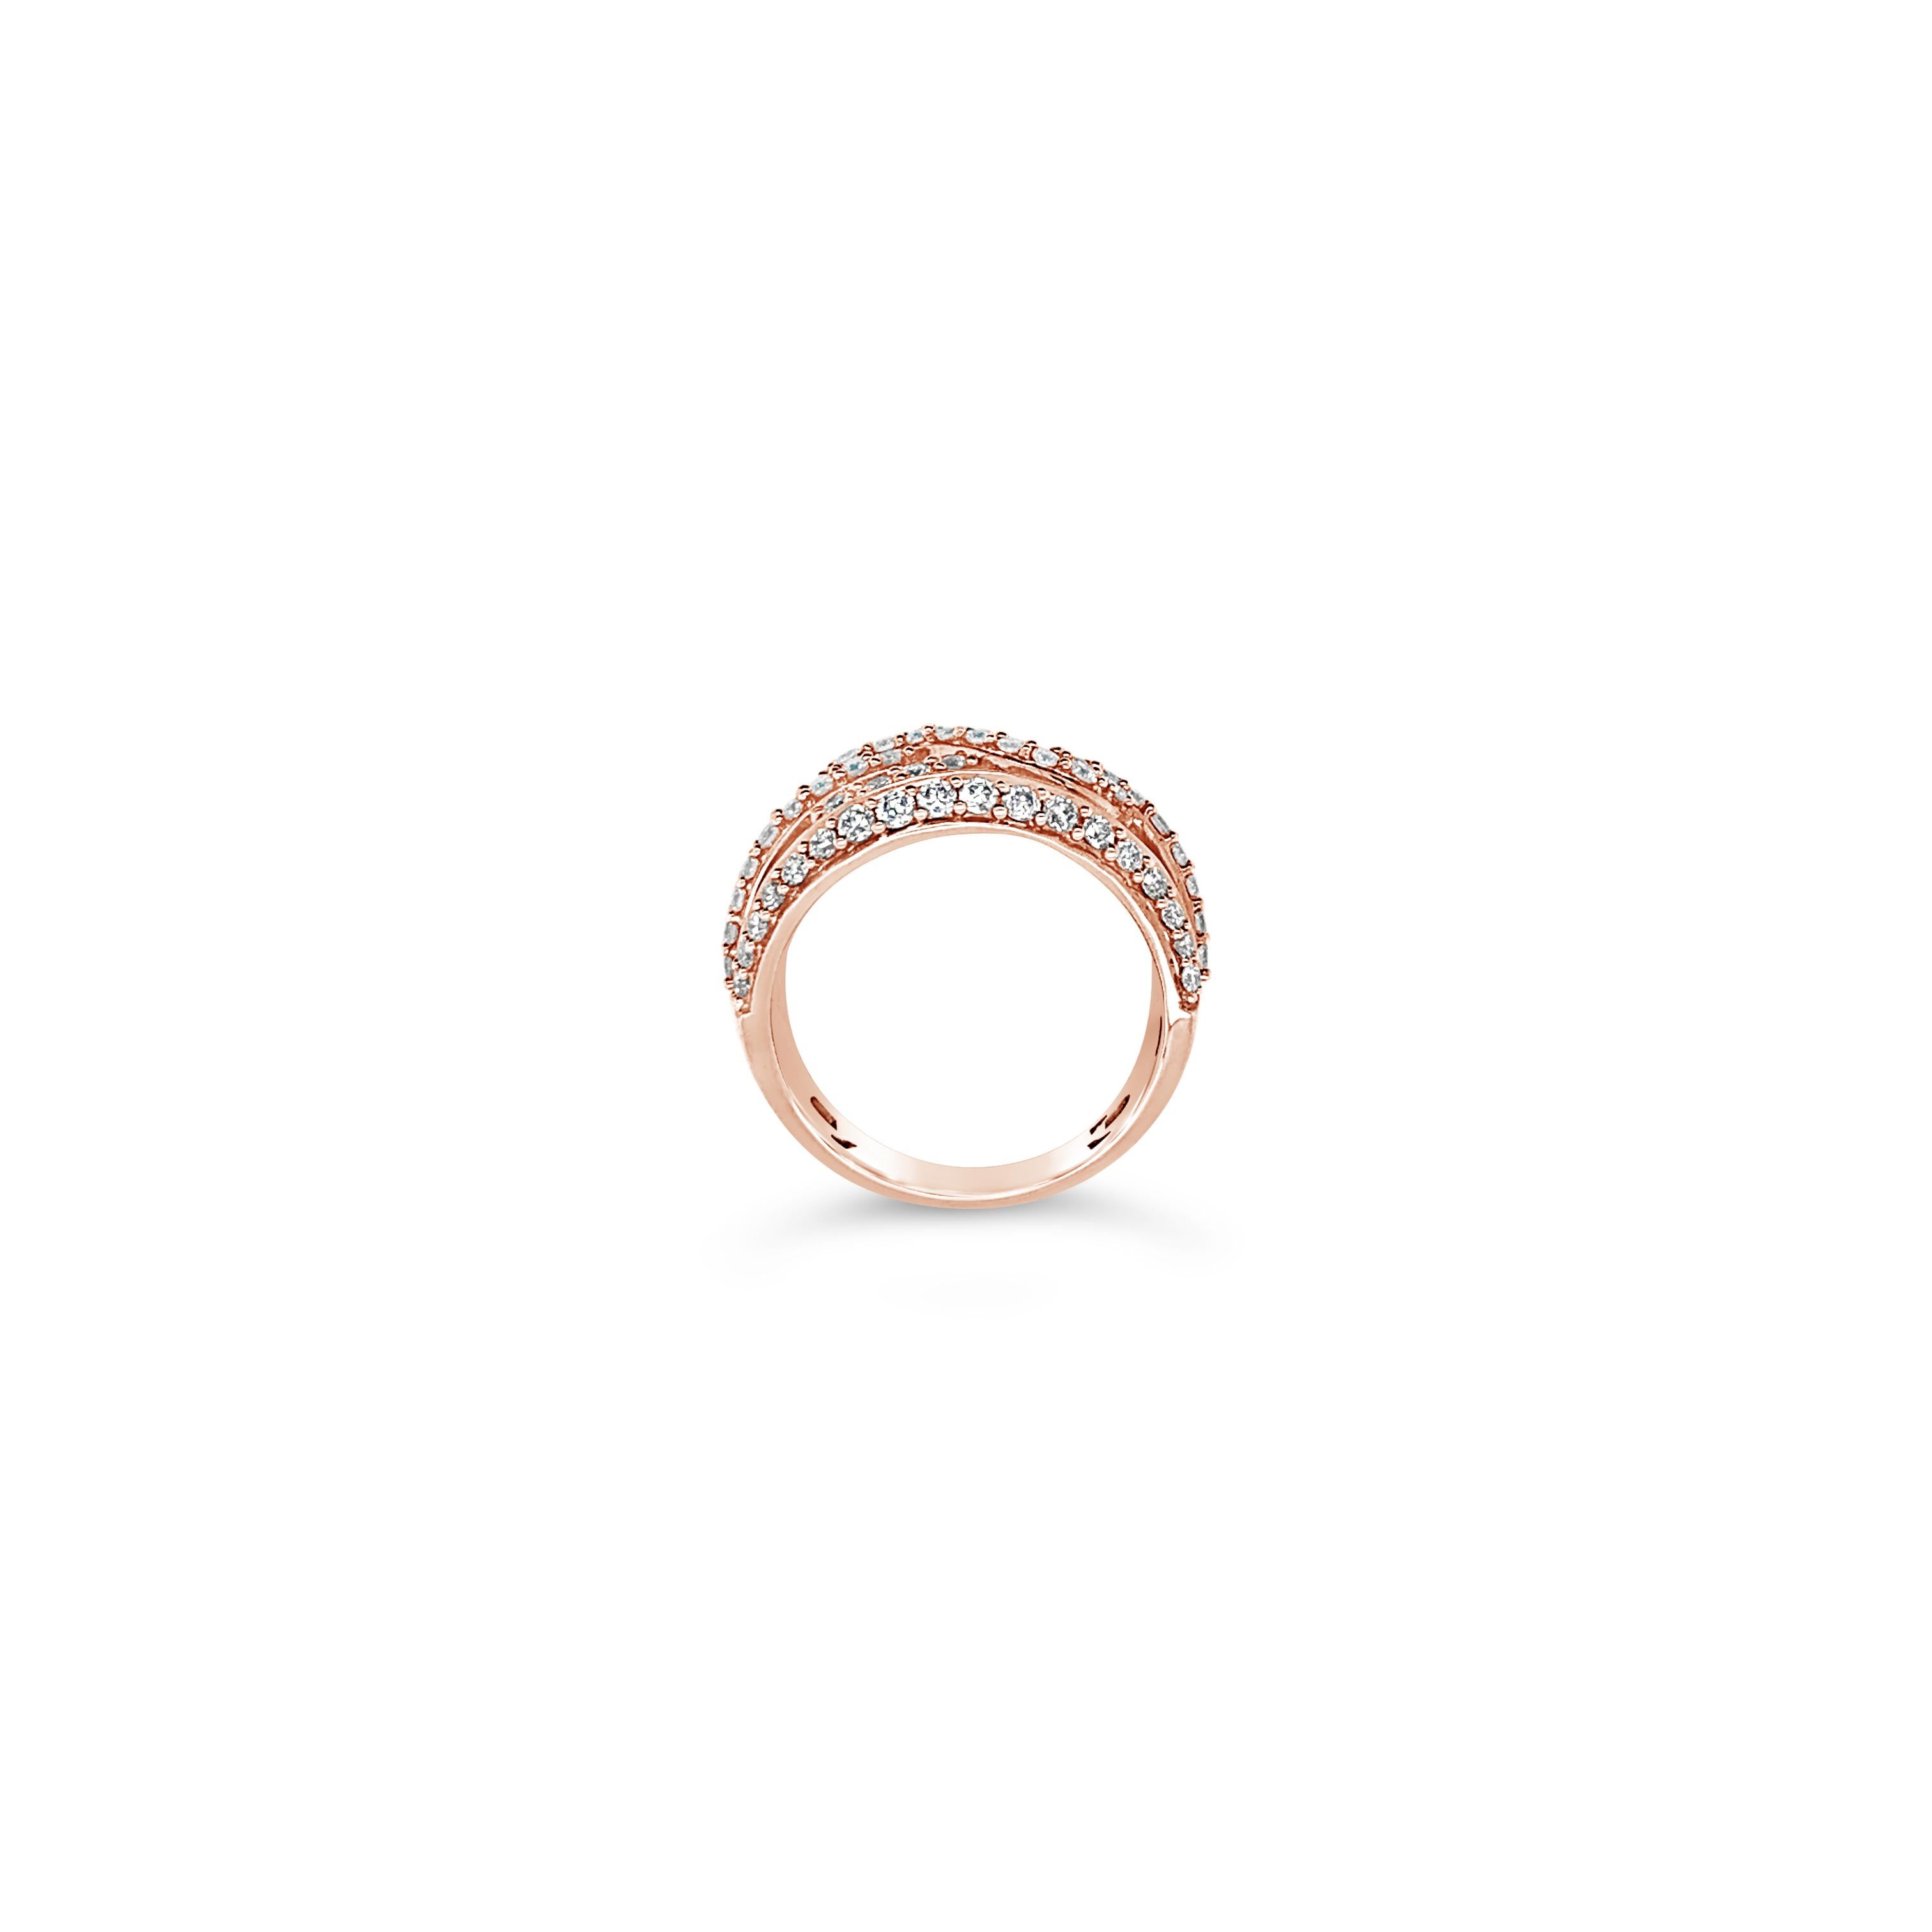 Le Vian® Ring featuring 1.23 cts. Vanilla Diamonds® set in 14K Strawberry Gold®

Diamonds Breakdown:
1.23 cts White Diamonds

Gems Breakdown:
None

Ring may or may not be sizable, please feel free to reach out with any questions!

Item comes with a